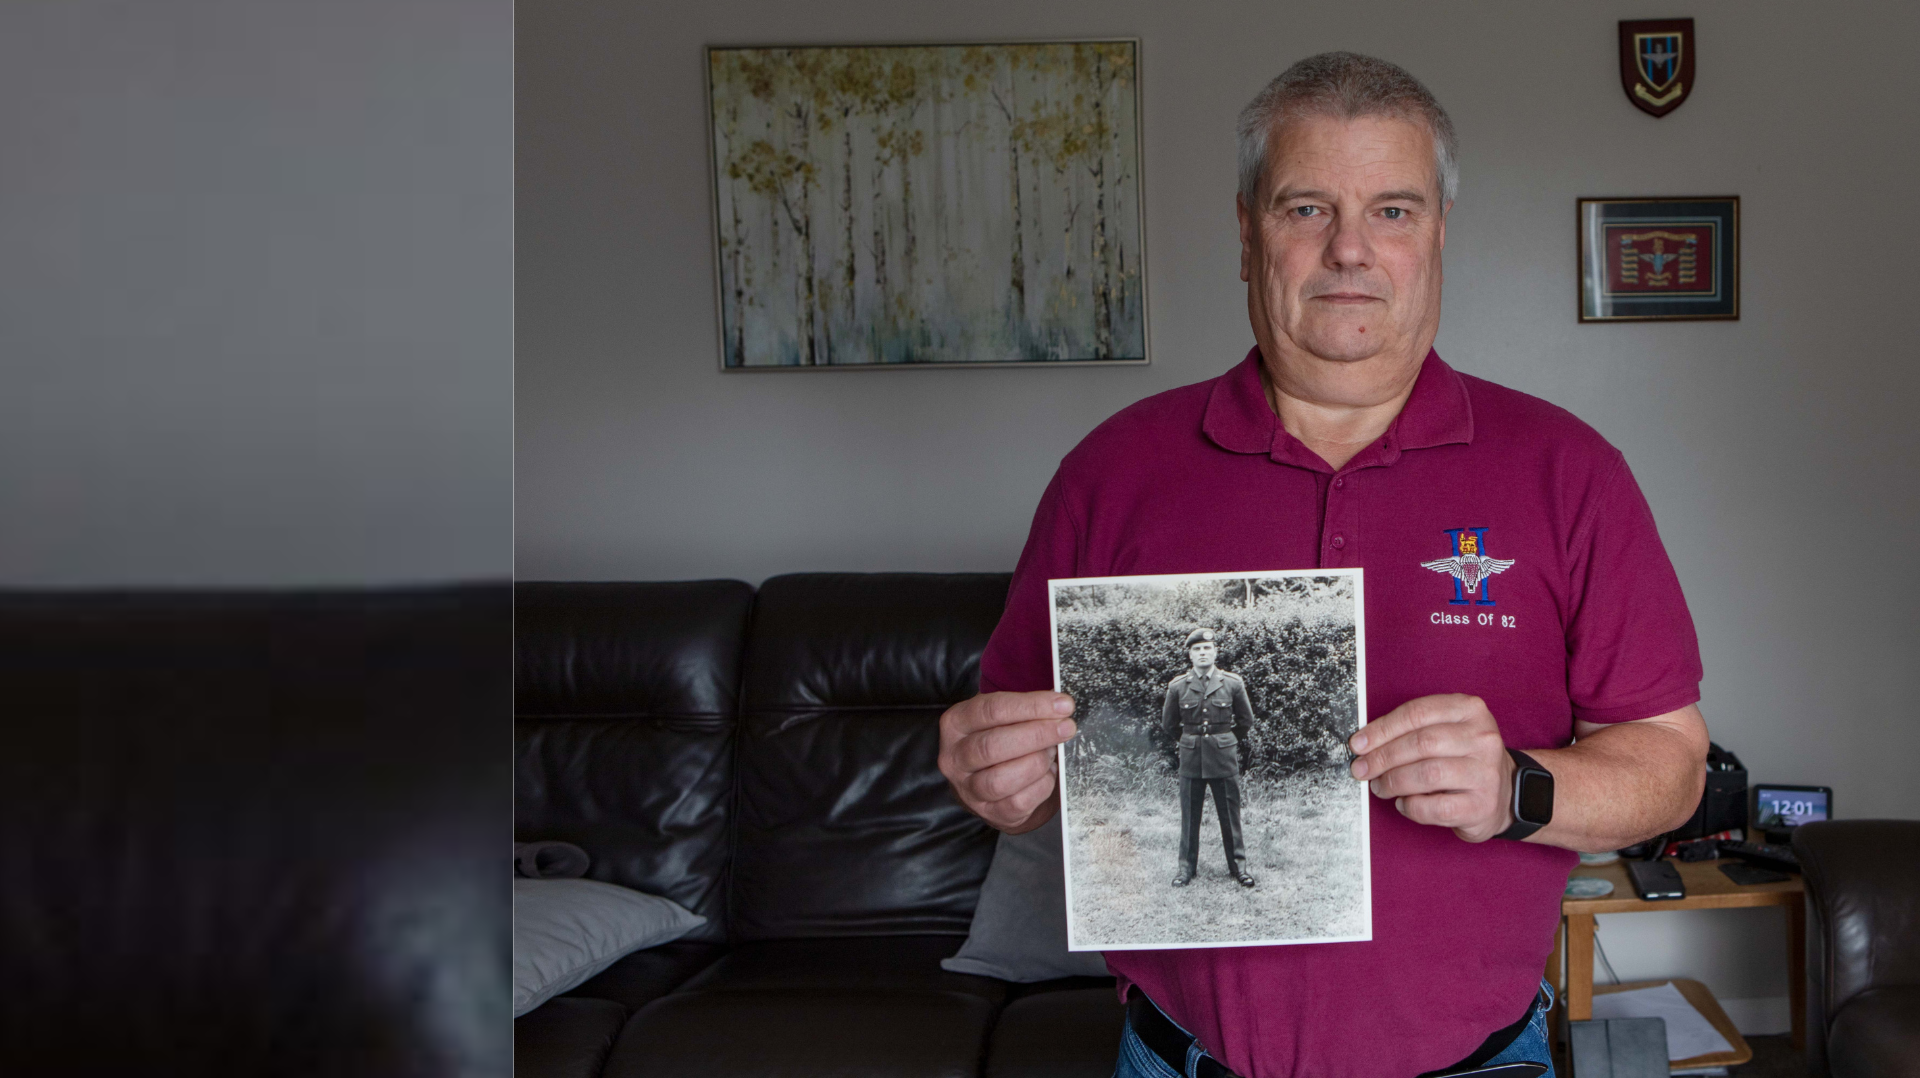 Blind veteran Steve holding a photo of him as a younger man in uniform